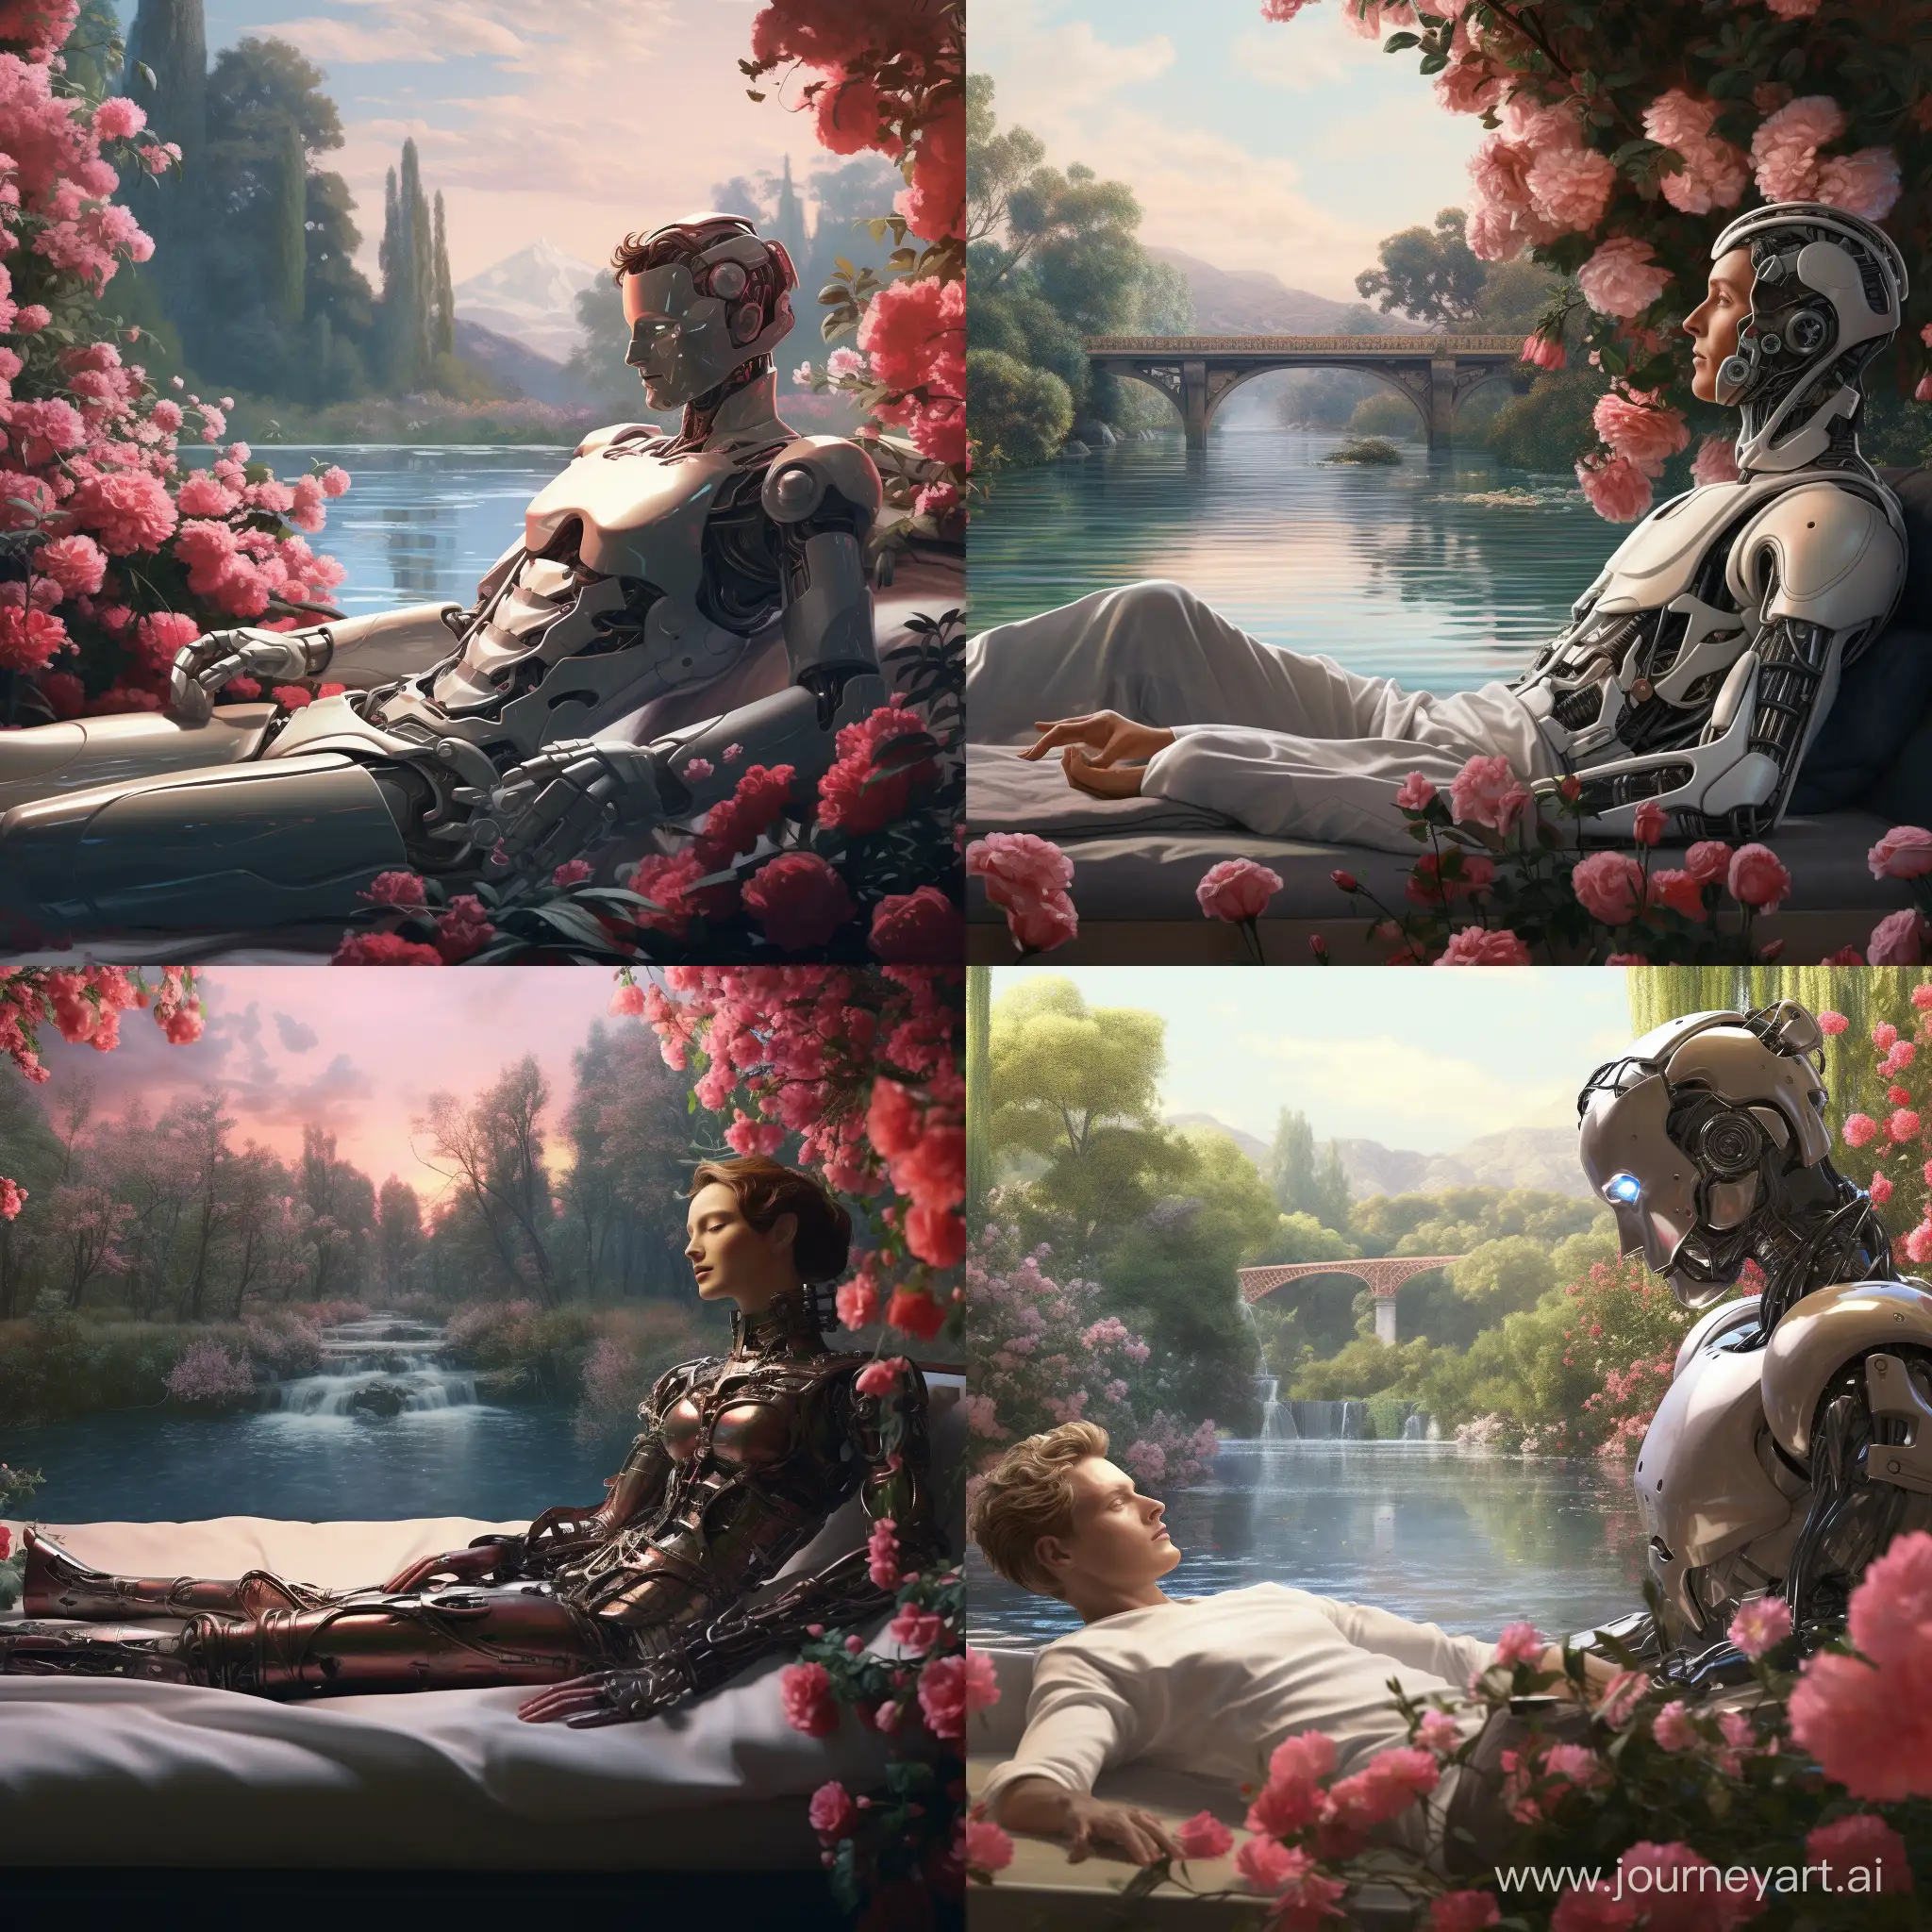  An Ai robot in a beautiful garden of roses watching a man on a beautiful bed floating on a river